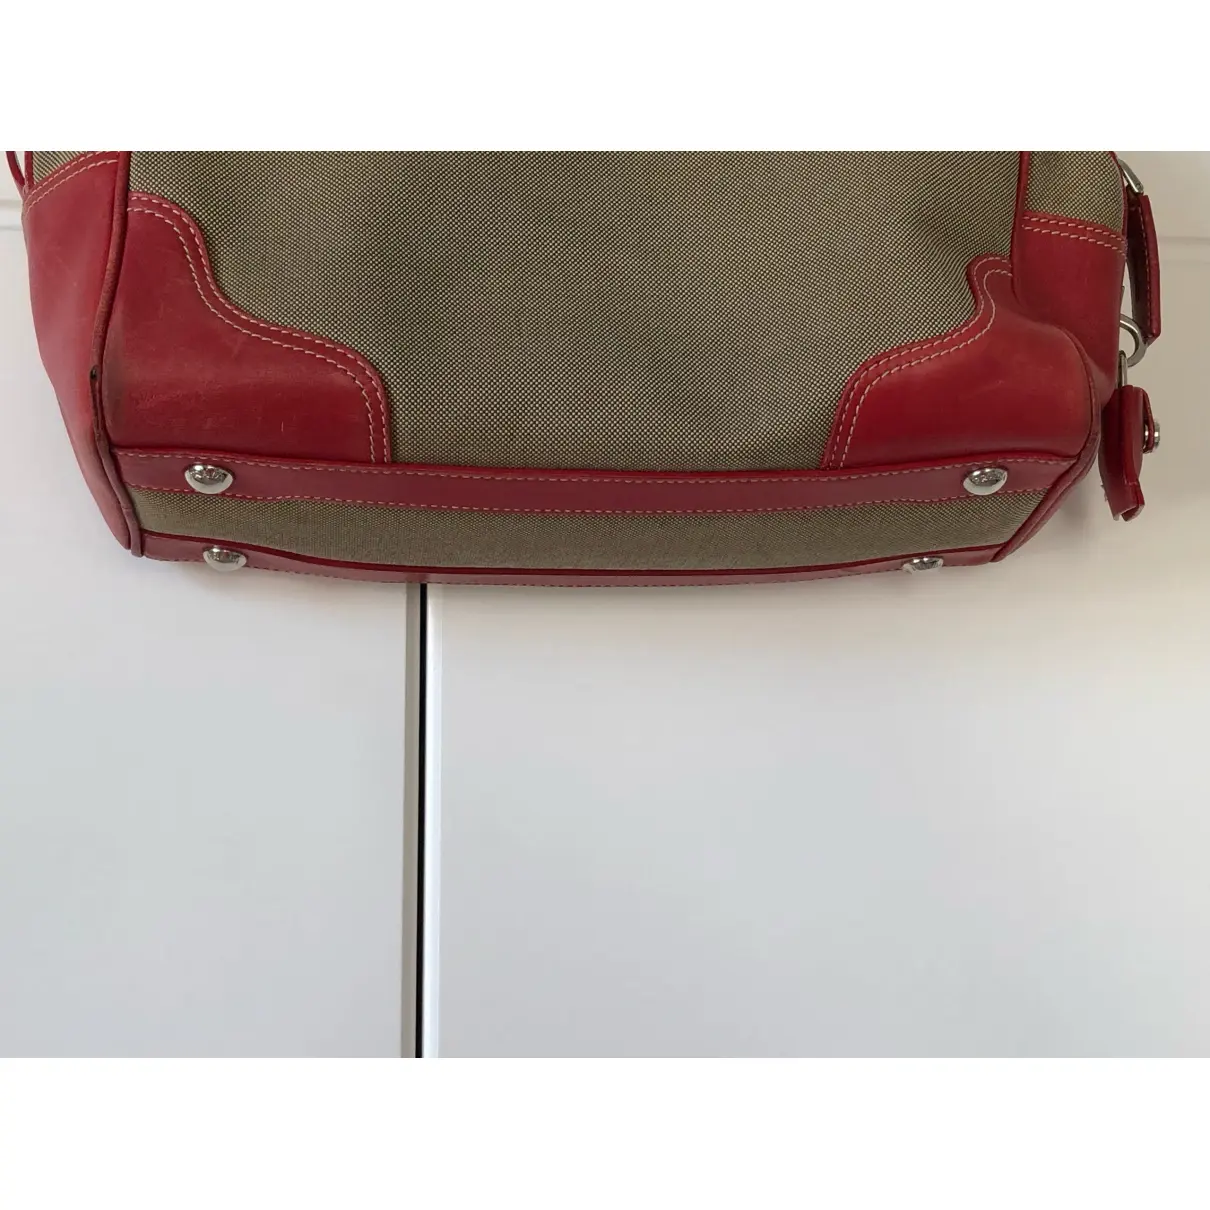 Second hand Bags Women - Vintage